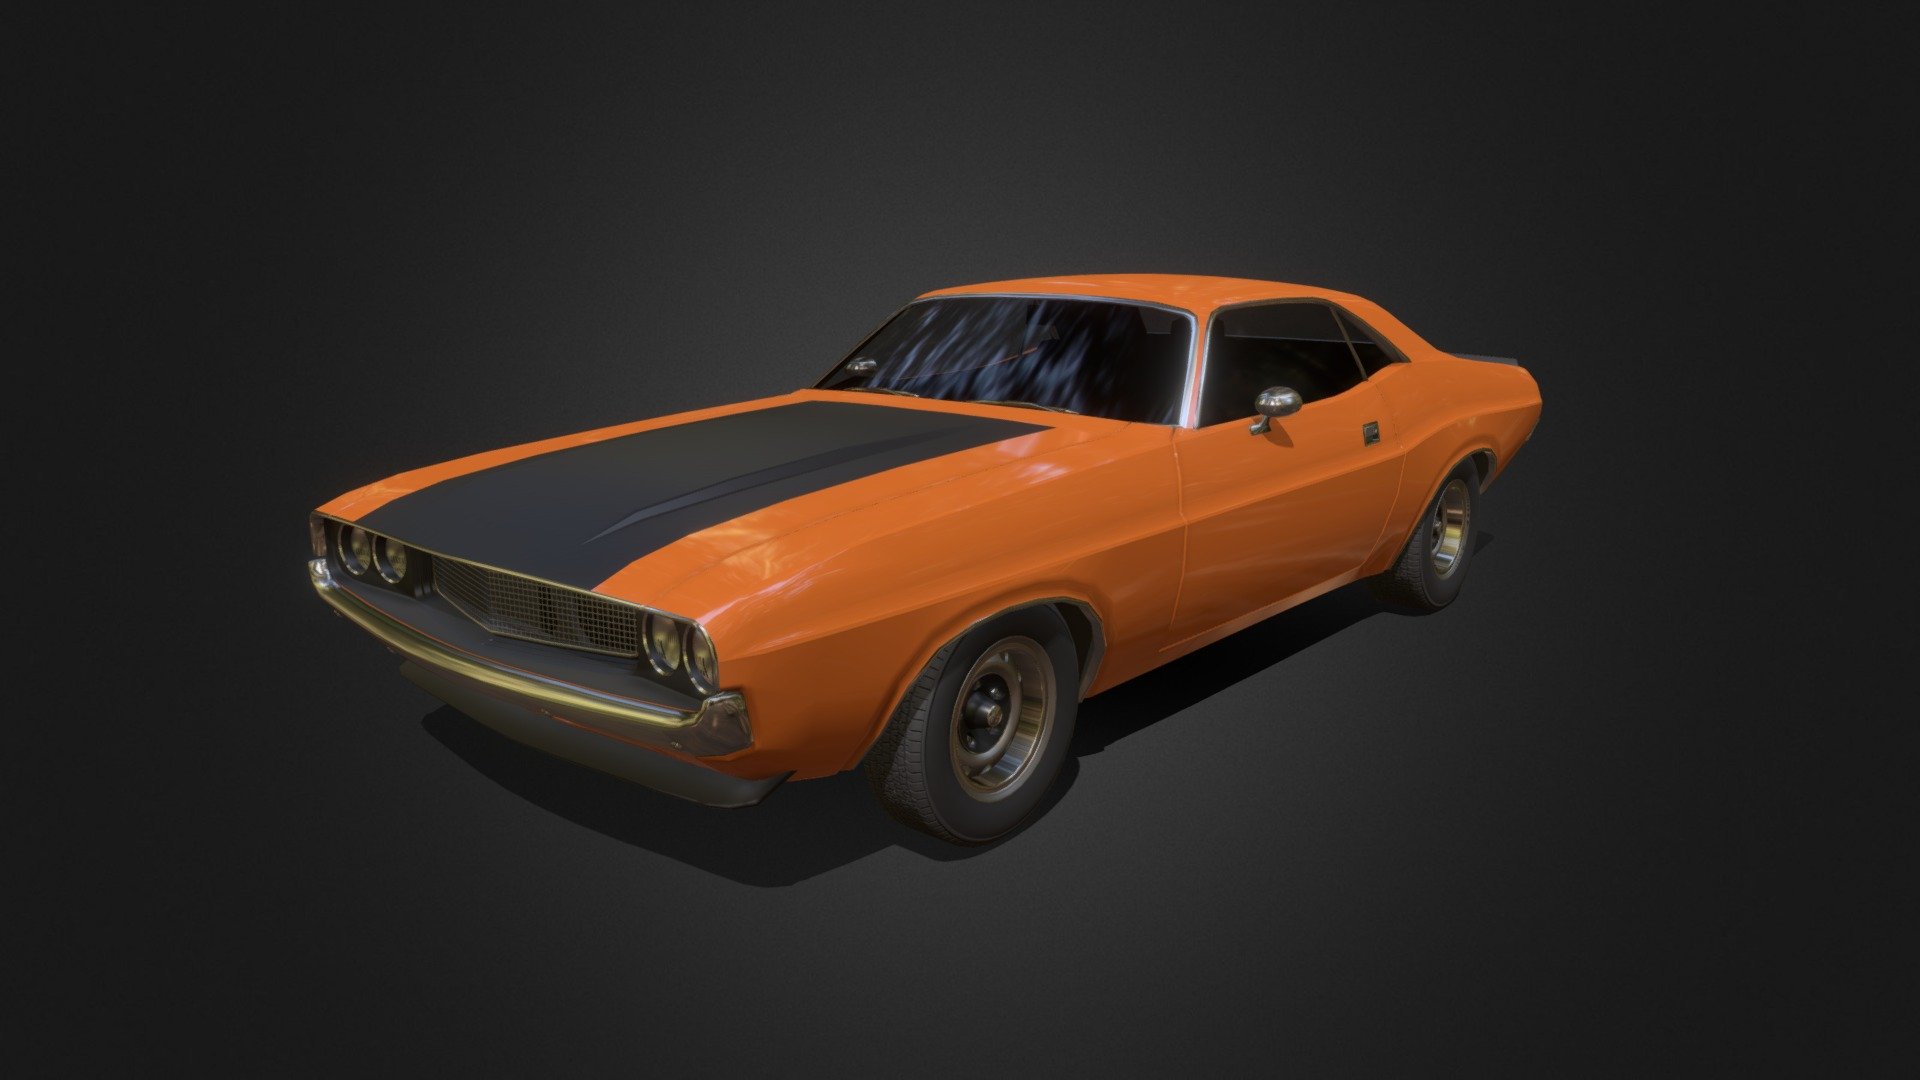 Game-ready vehicle model with Textures, 4 LOD states, and simplified collision meshes.

Vehicle model is based on 1970s car designs with classic muscle car wheels 3d model